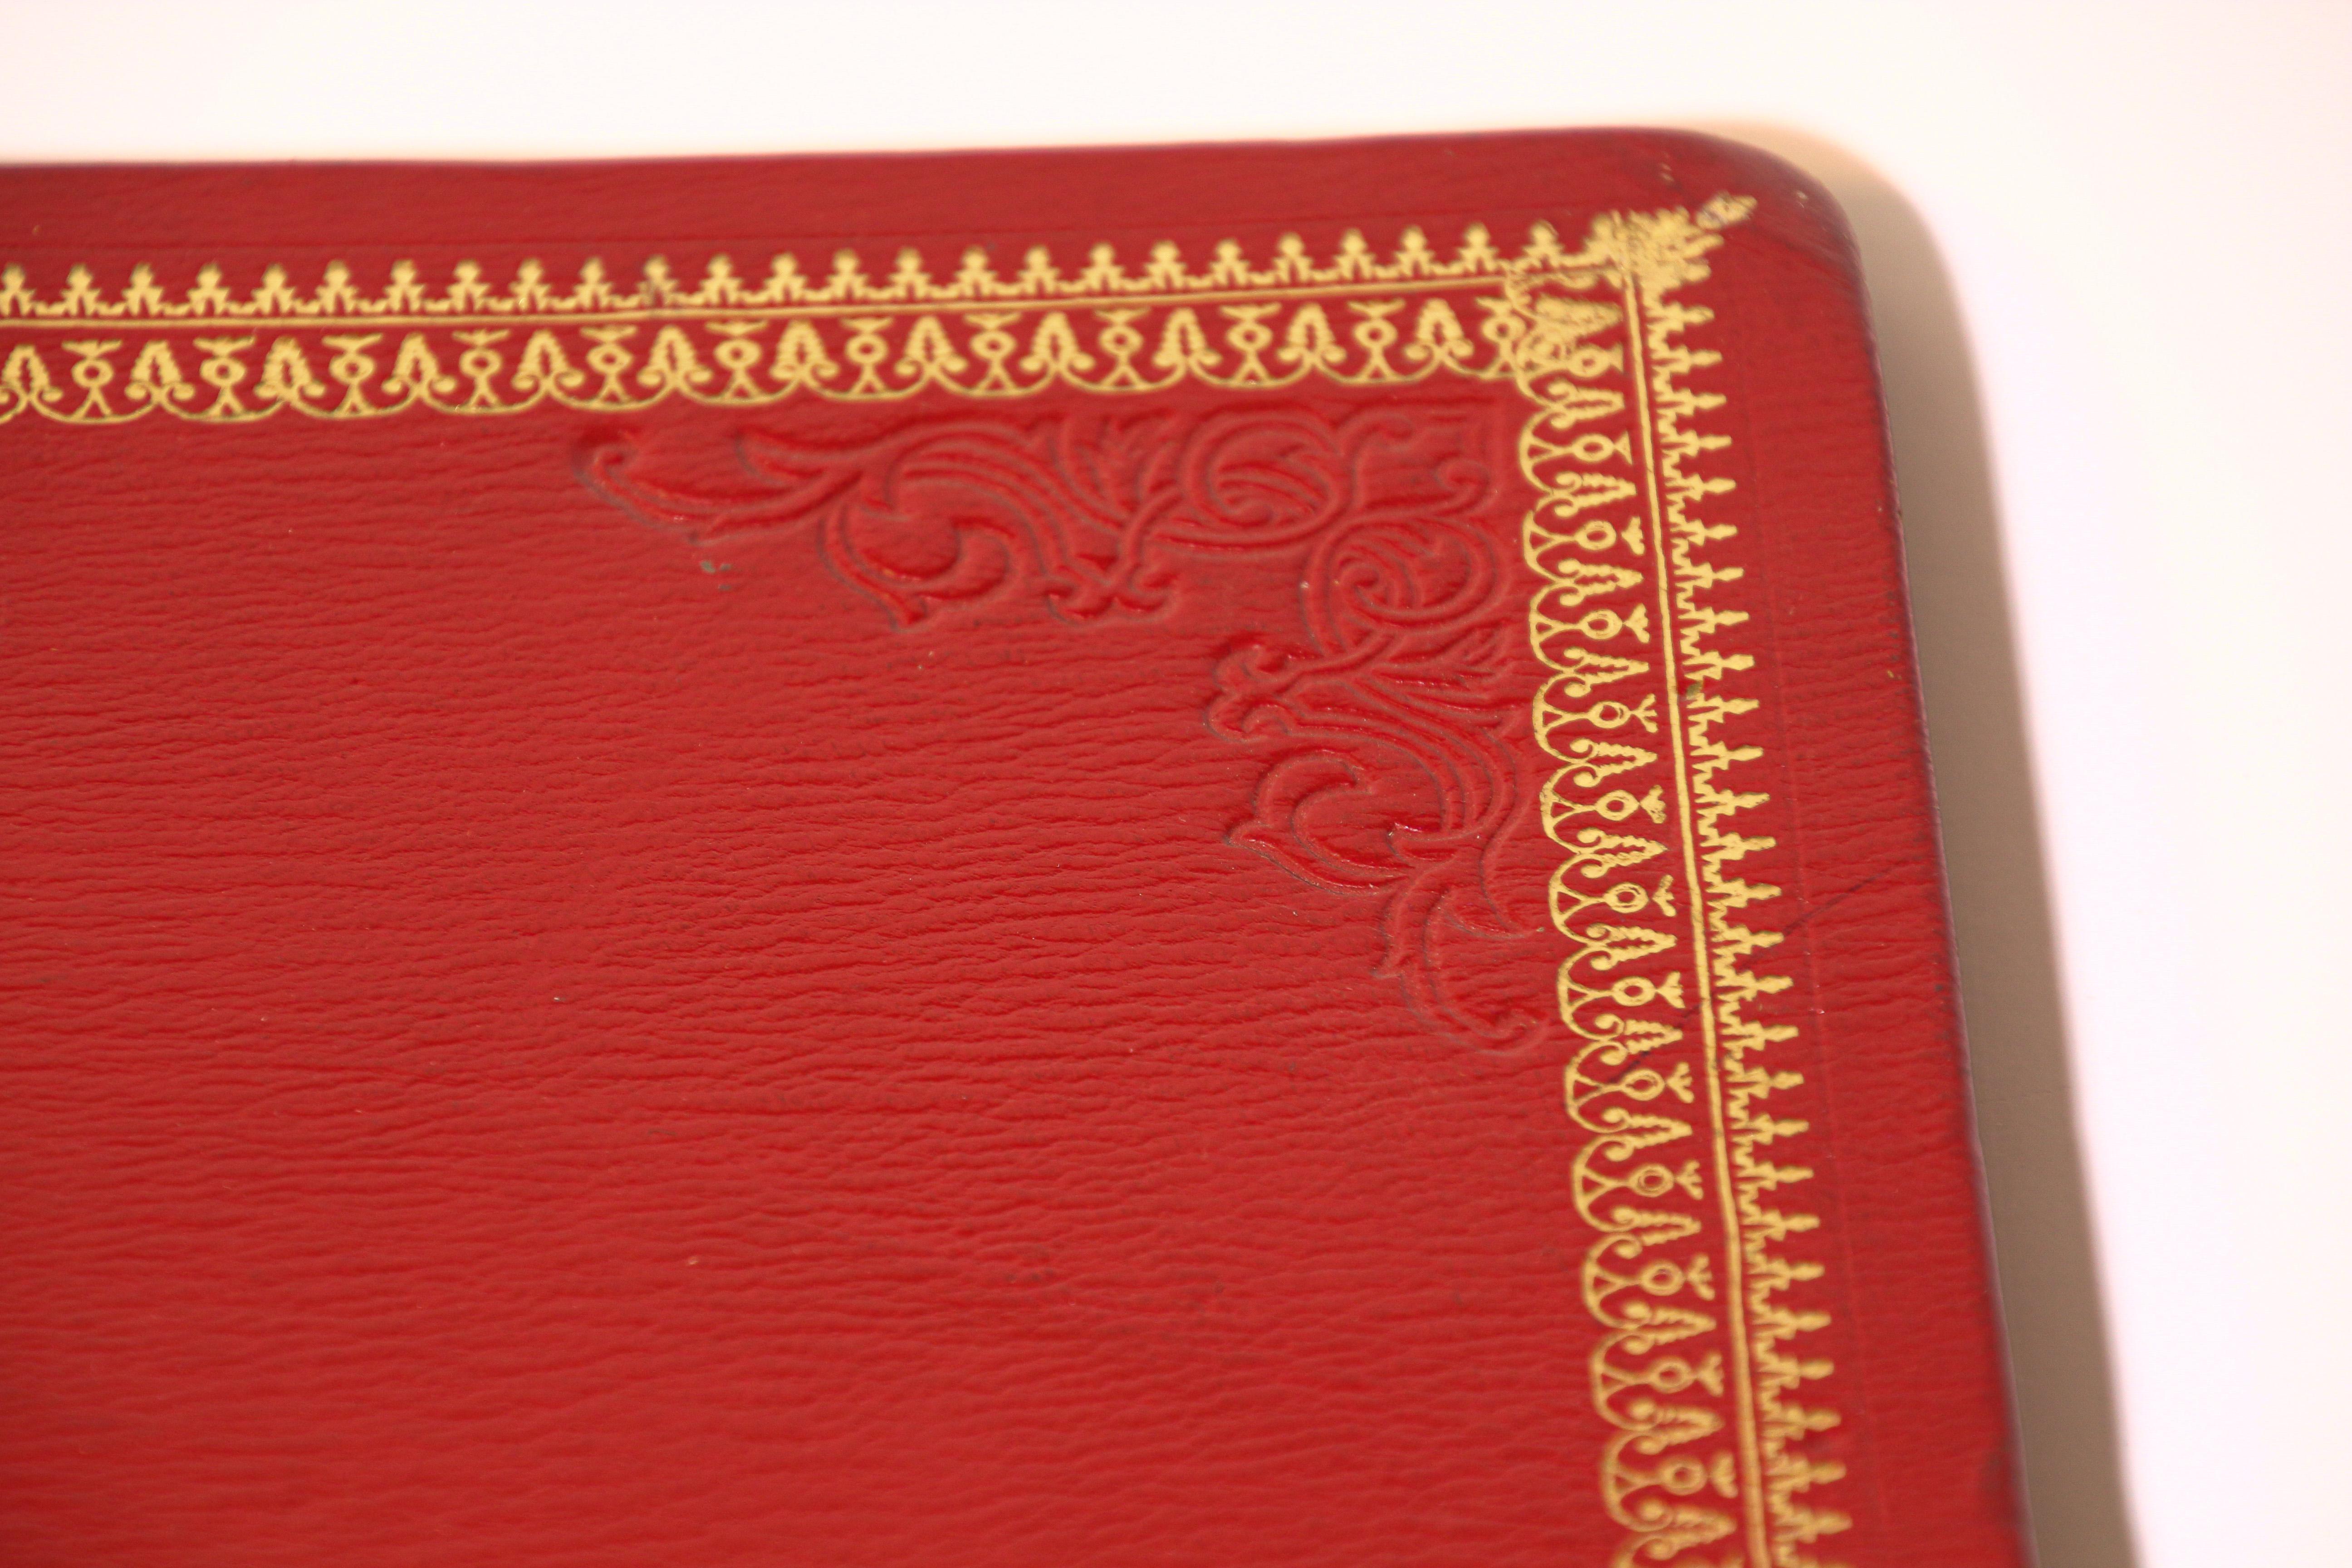 Vintage leather Moroccan embossed leather padfolio.
Red vintage leather portfolio embossed with gold 22 carat design.
Handmade leather stamped with 22 karat gold designs. 
Size is 14